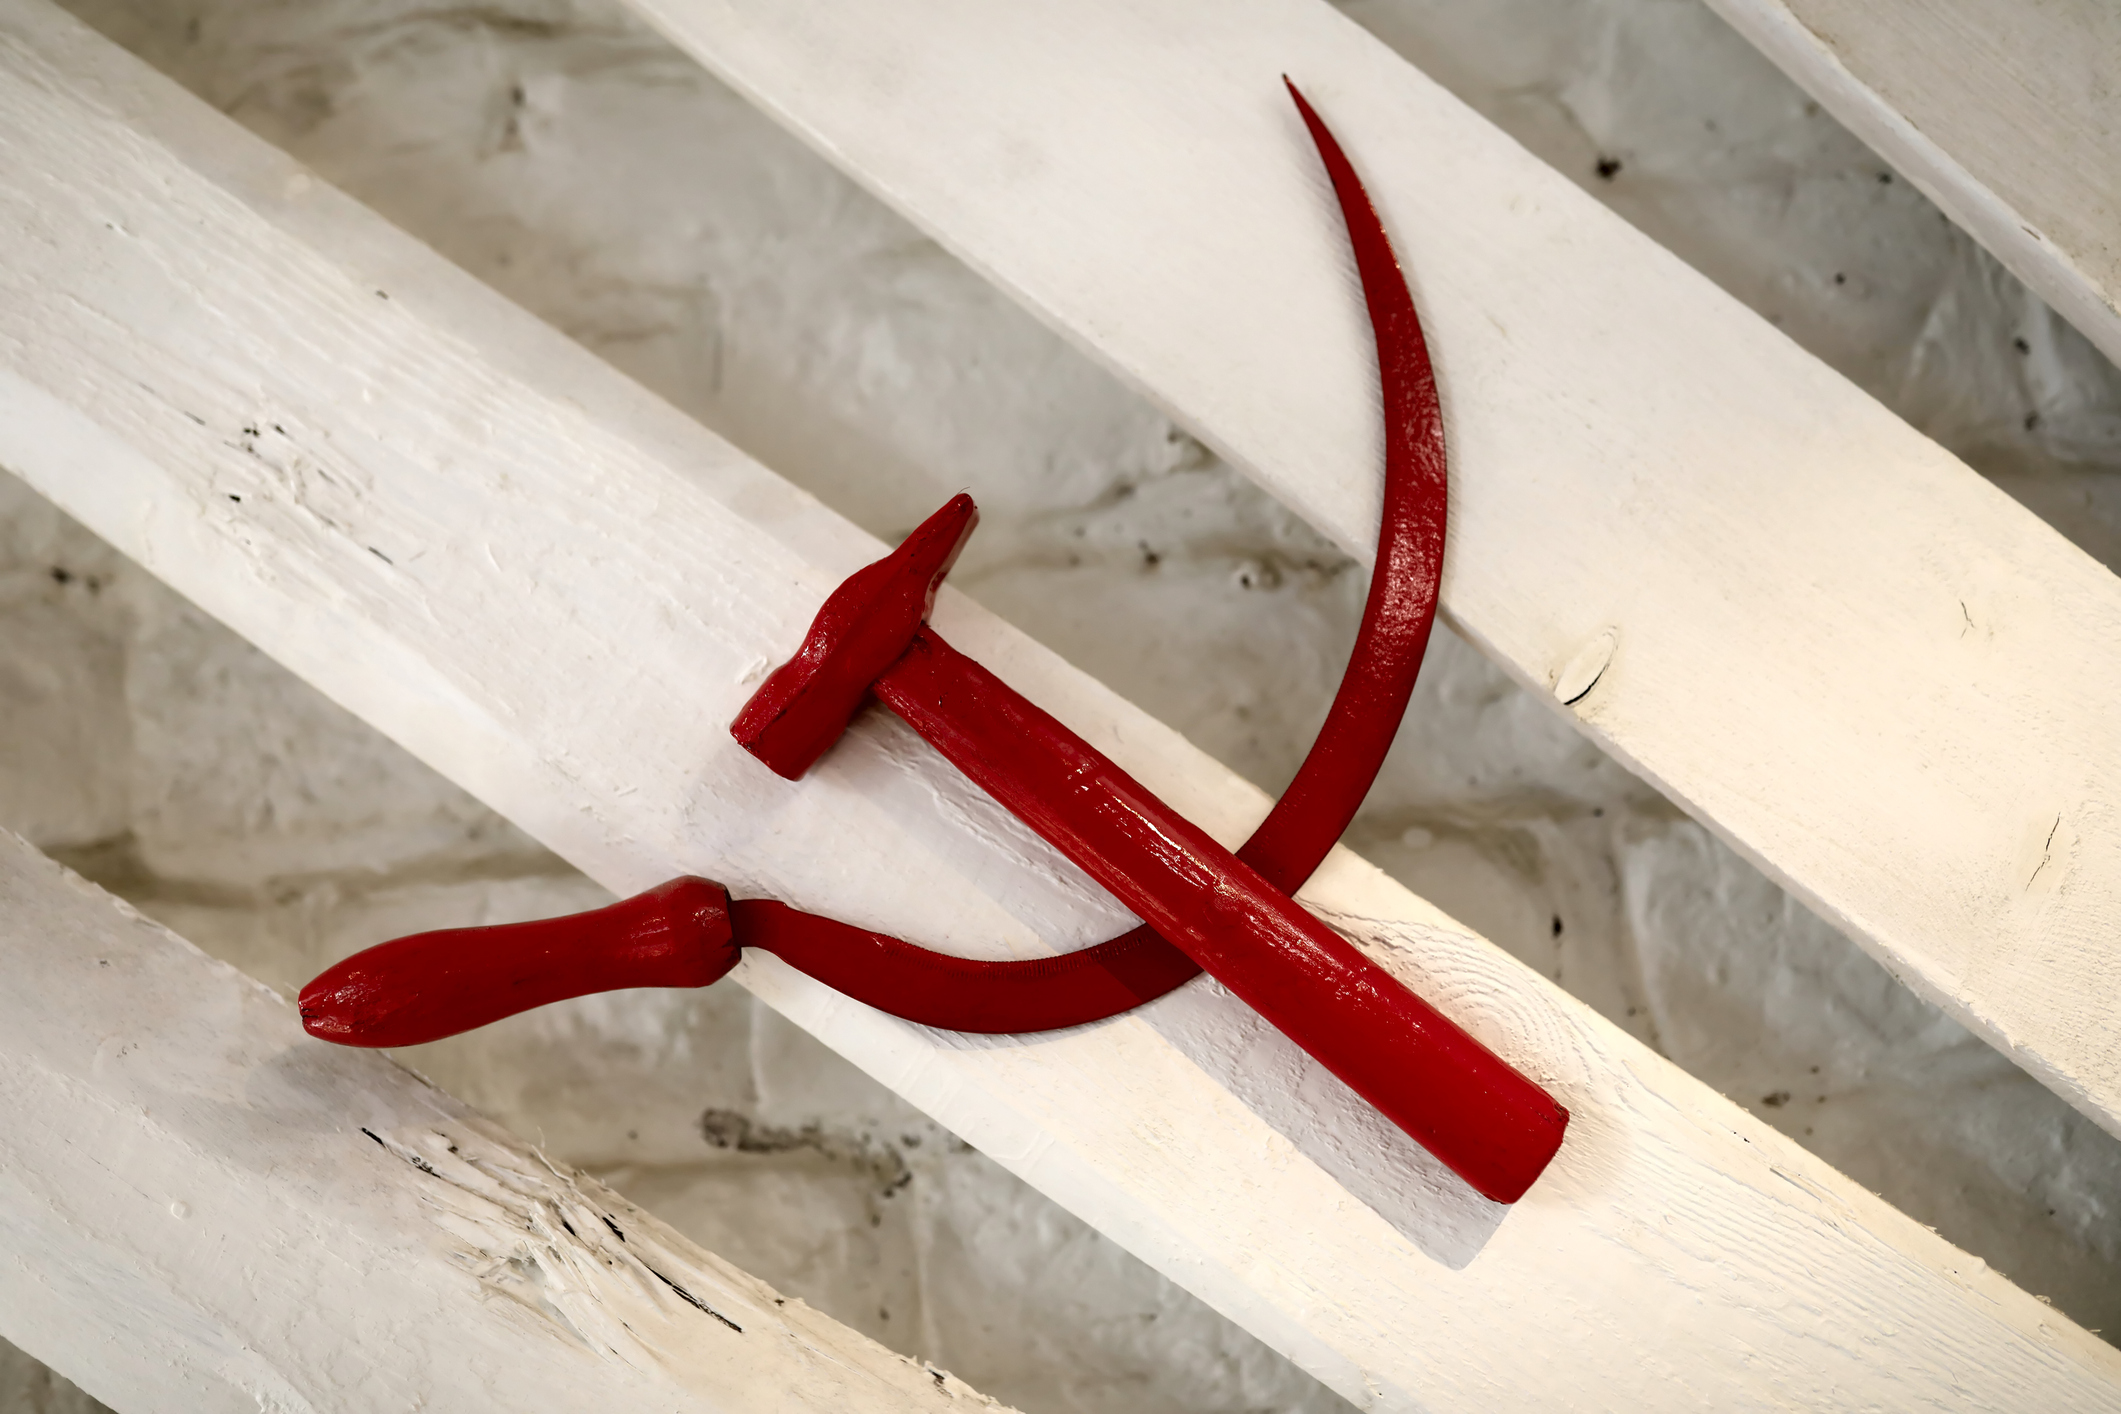 Soviet symbol hammer and sickle on wall